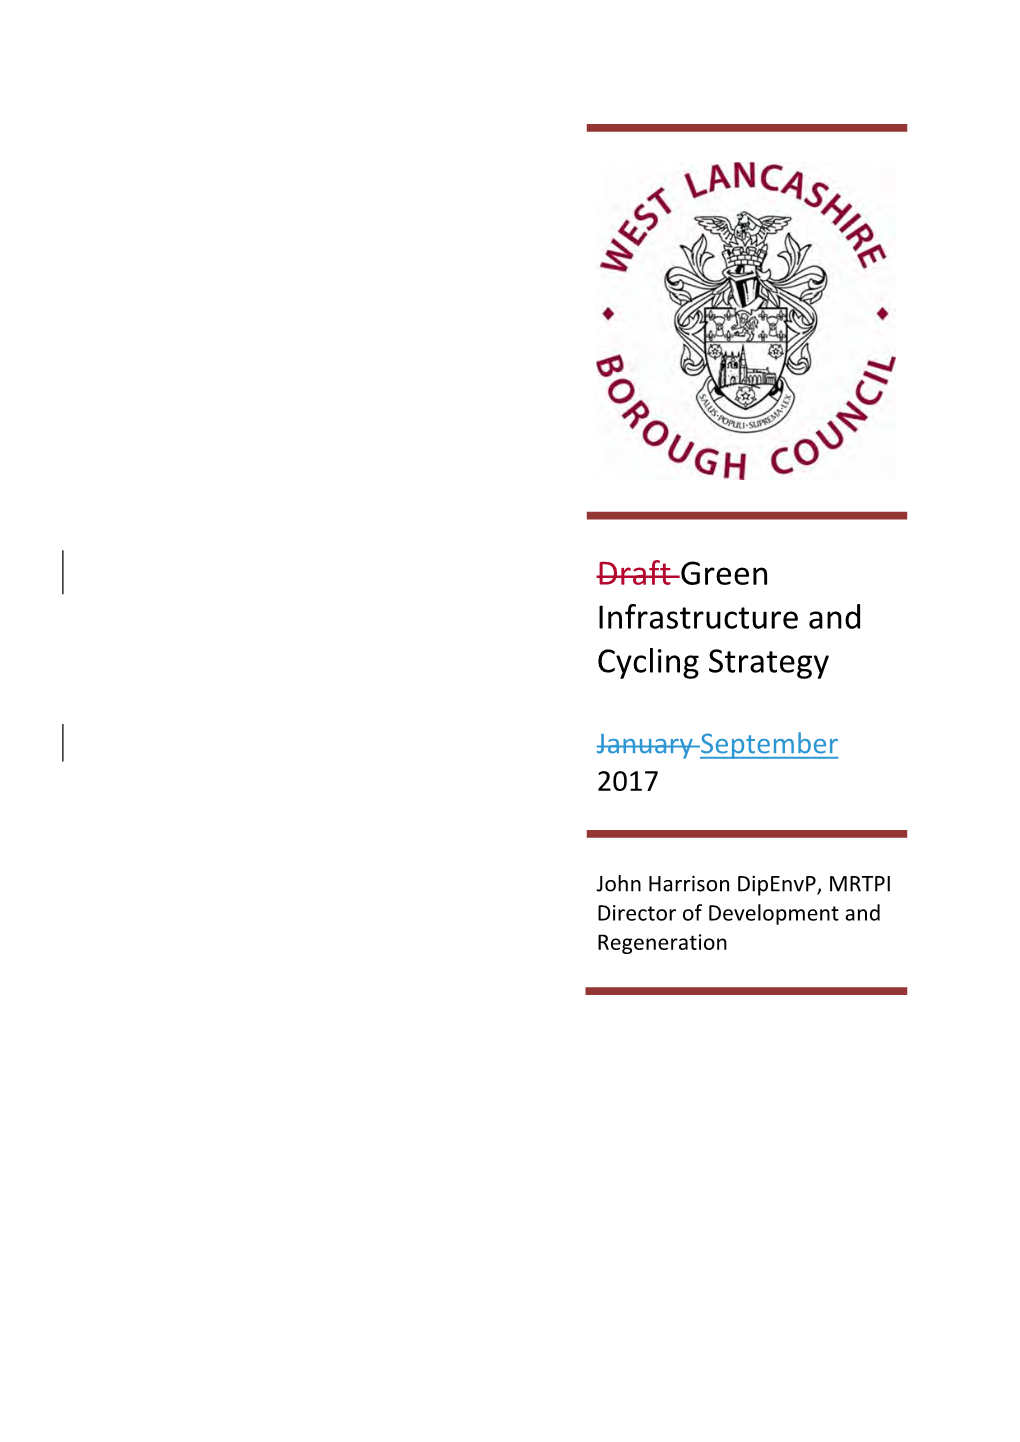 Draft Green Infrastructure and Cycling Strategy